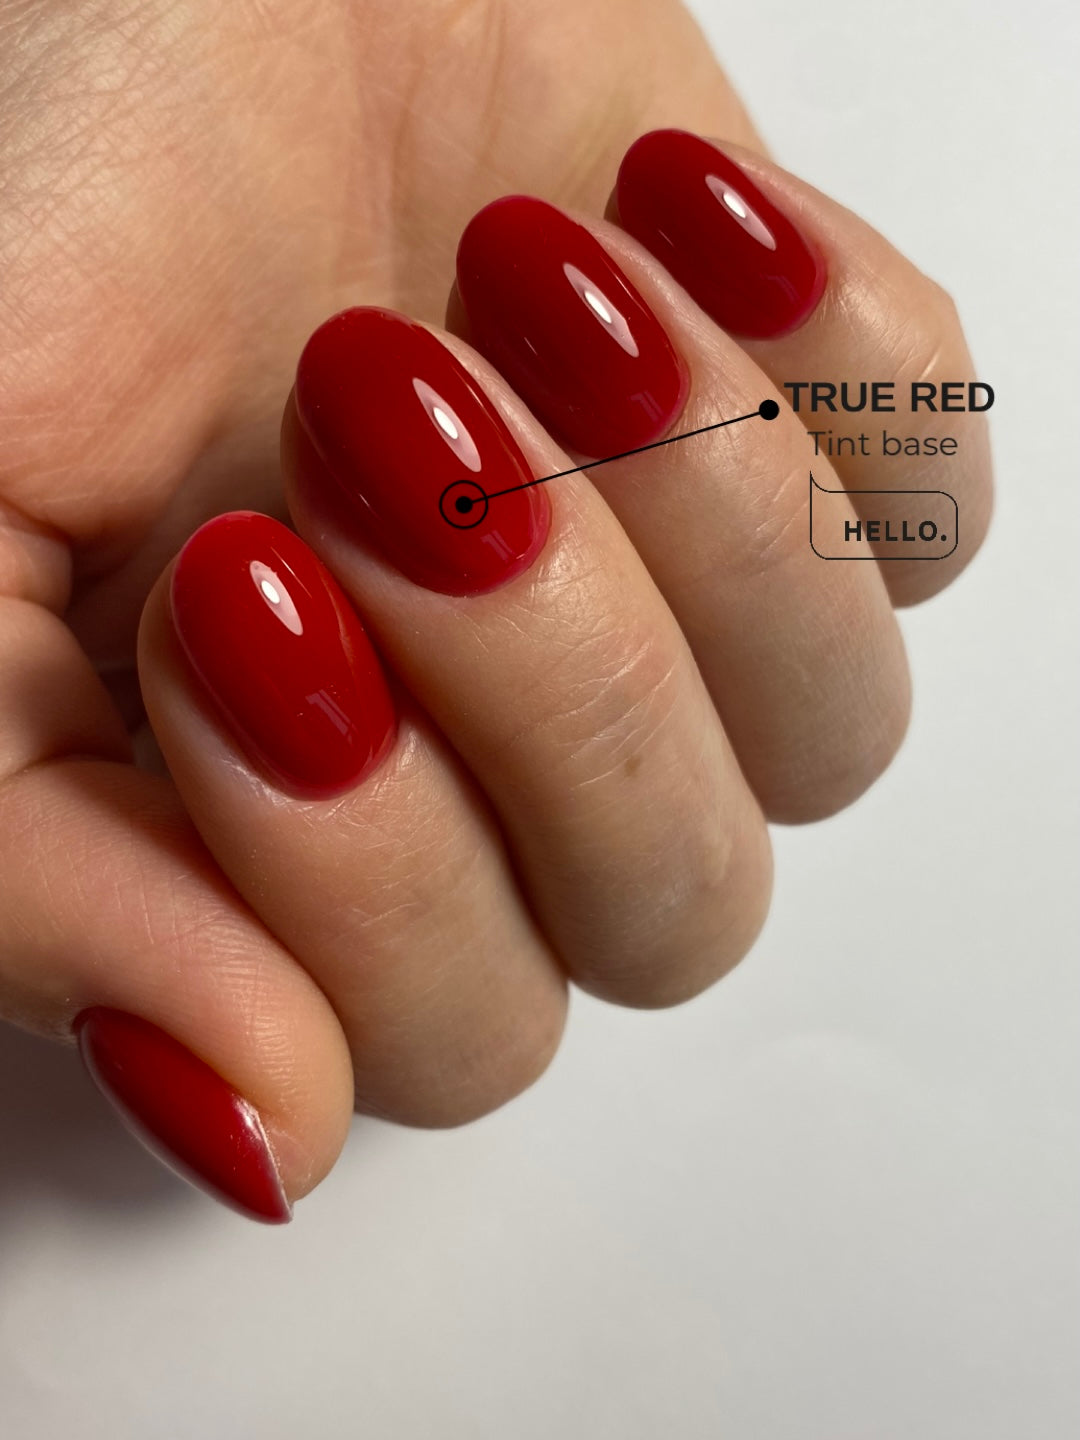 TRUE RED Tinted Base 15ml